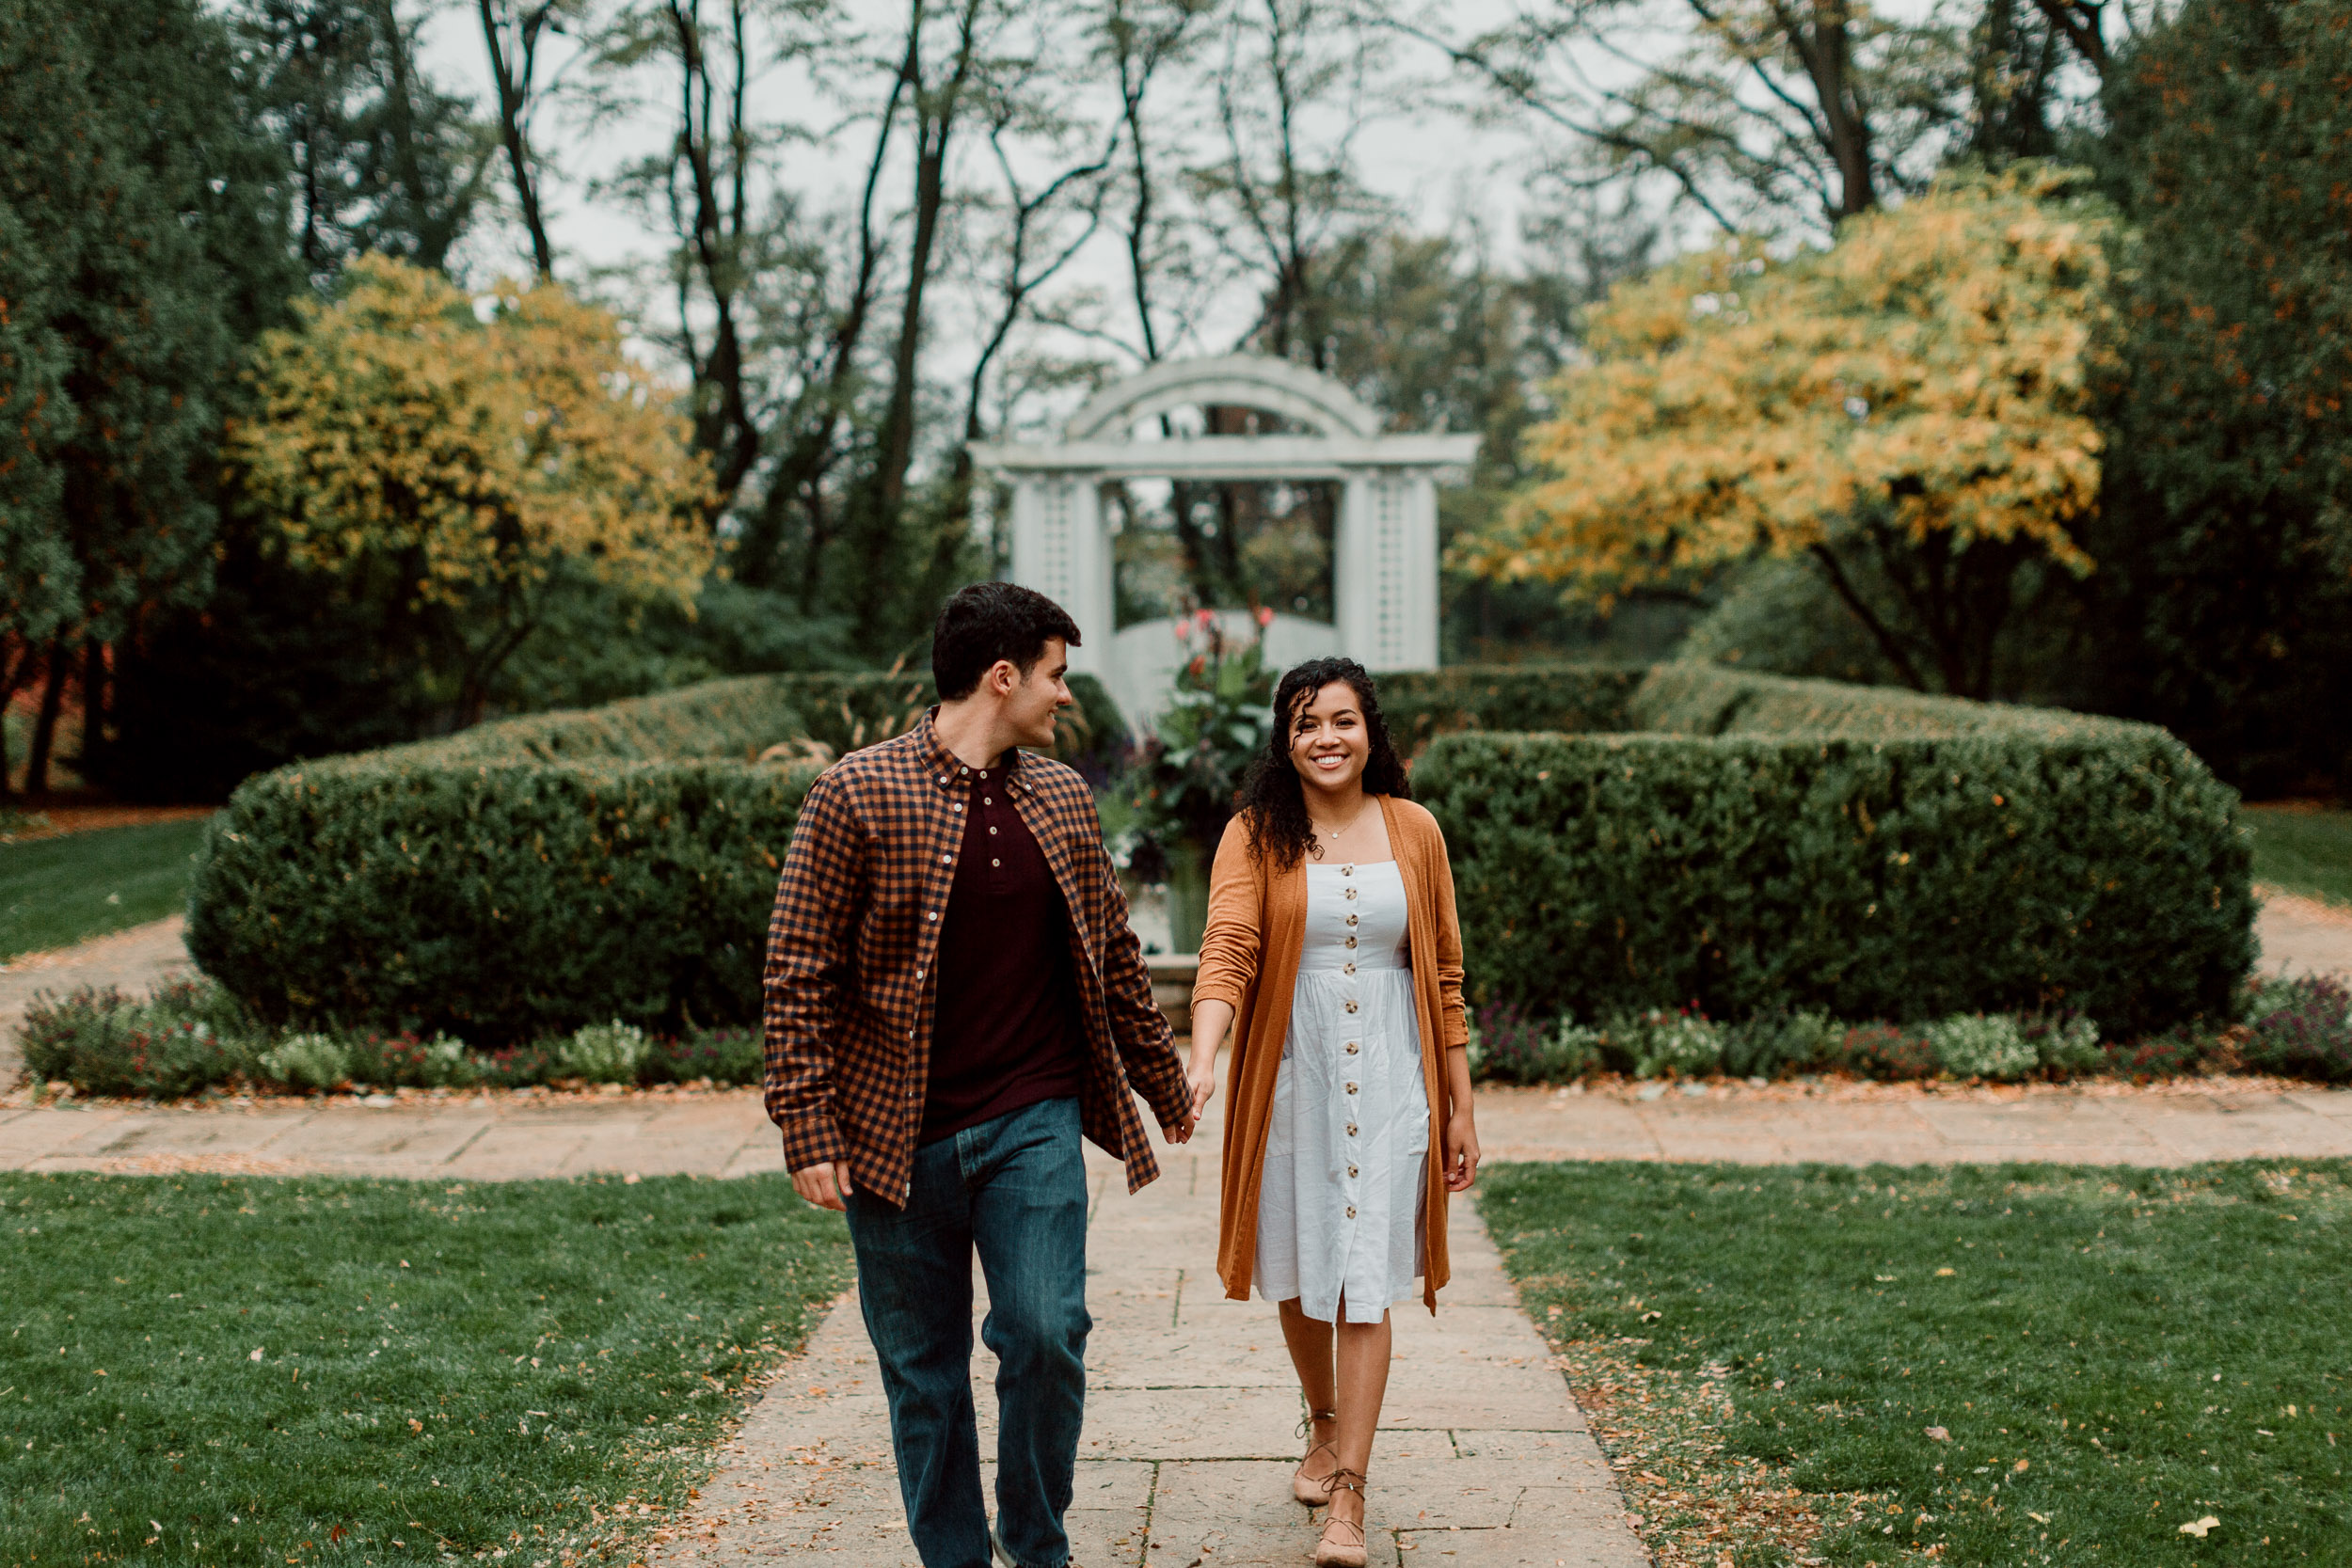 Fall Colors for Engagement Session | Spring Engagement Session Outfits | Sweet Couple in Chicago | Hurley Gardens Engagement Session | Chicago Engagement Photographer | Outdoor Engagement Photo Locations in Chicago | Engagement Photo Locations Chicago | Where to take Engagement Photos in Chicago
